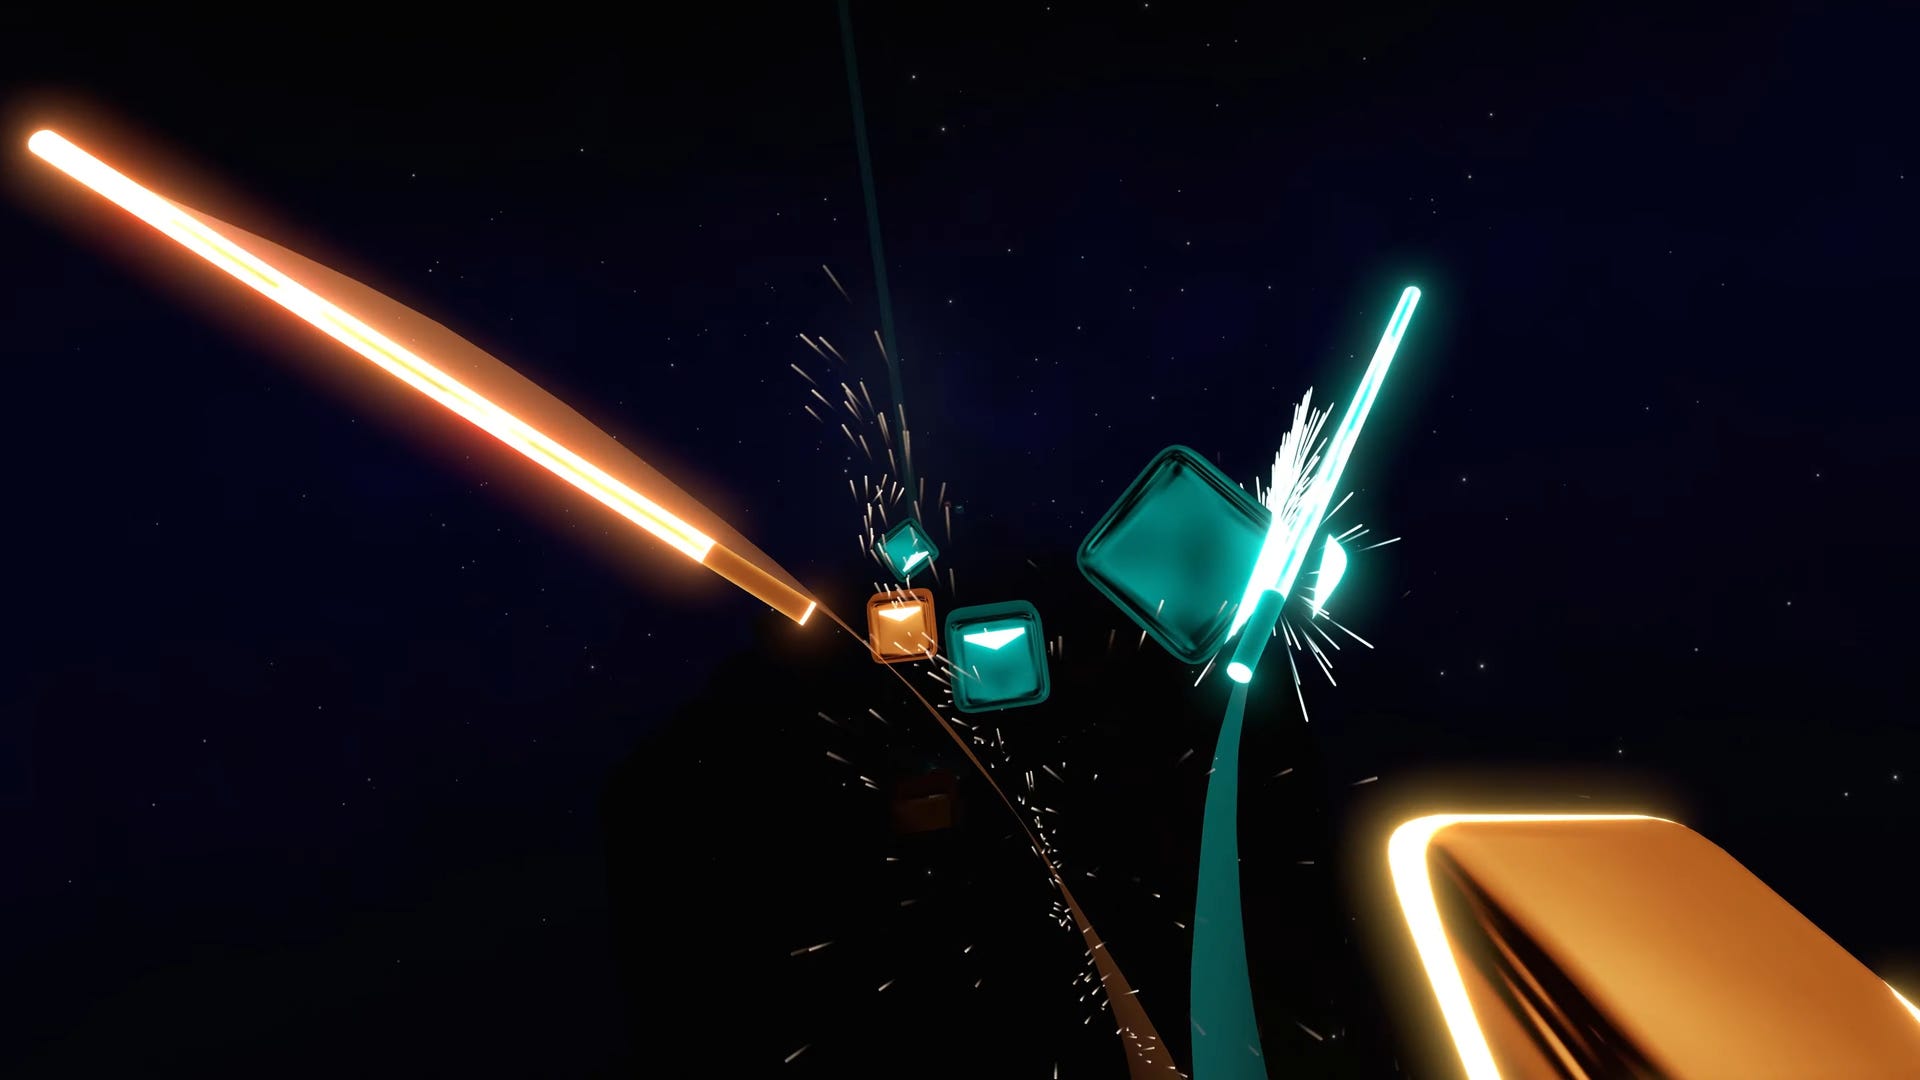 Beat Saber support on Meta Quest 1 VR headsets ending this year